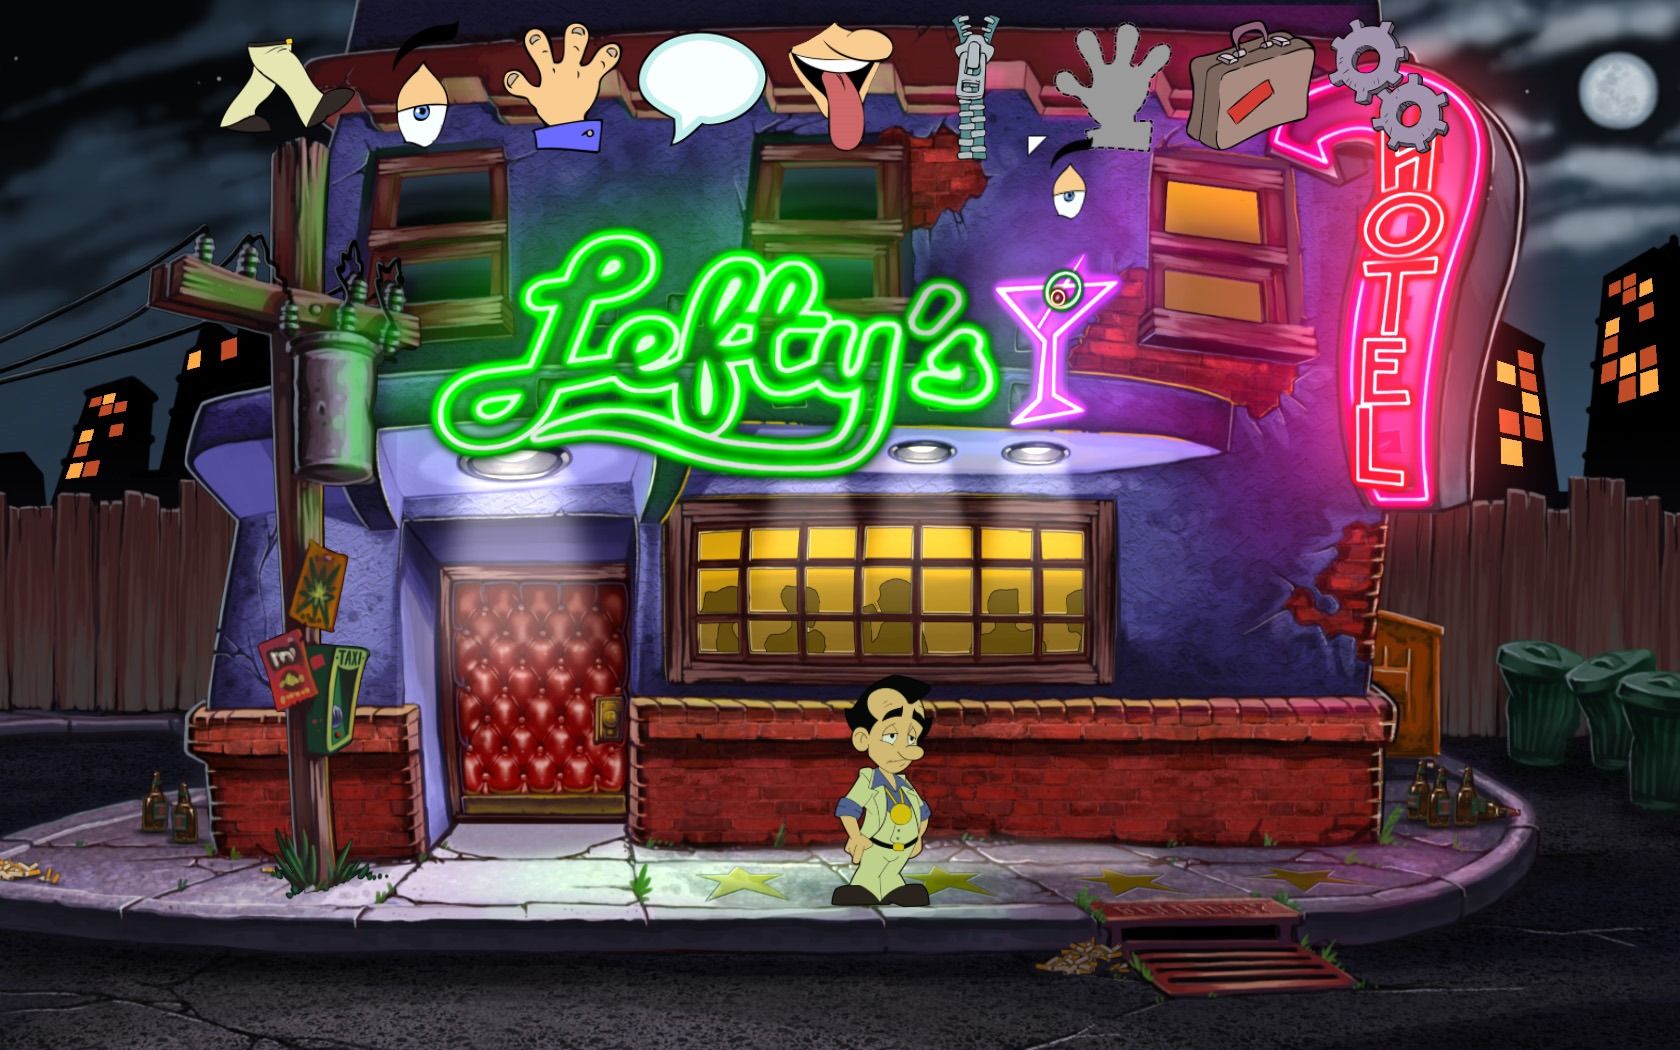 leisure-suit-larry-reloaded-debuts-on-android-may-31-for-9-99-reintroduces-larry-with-more